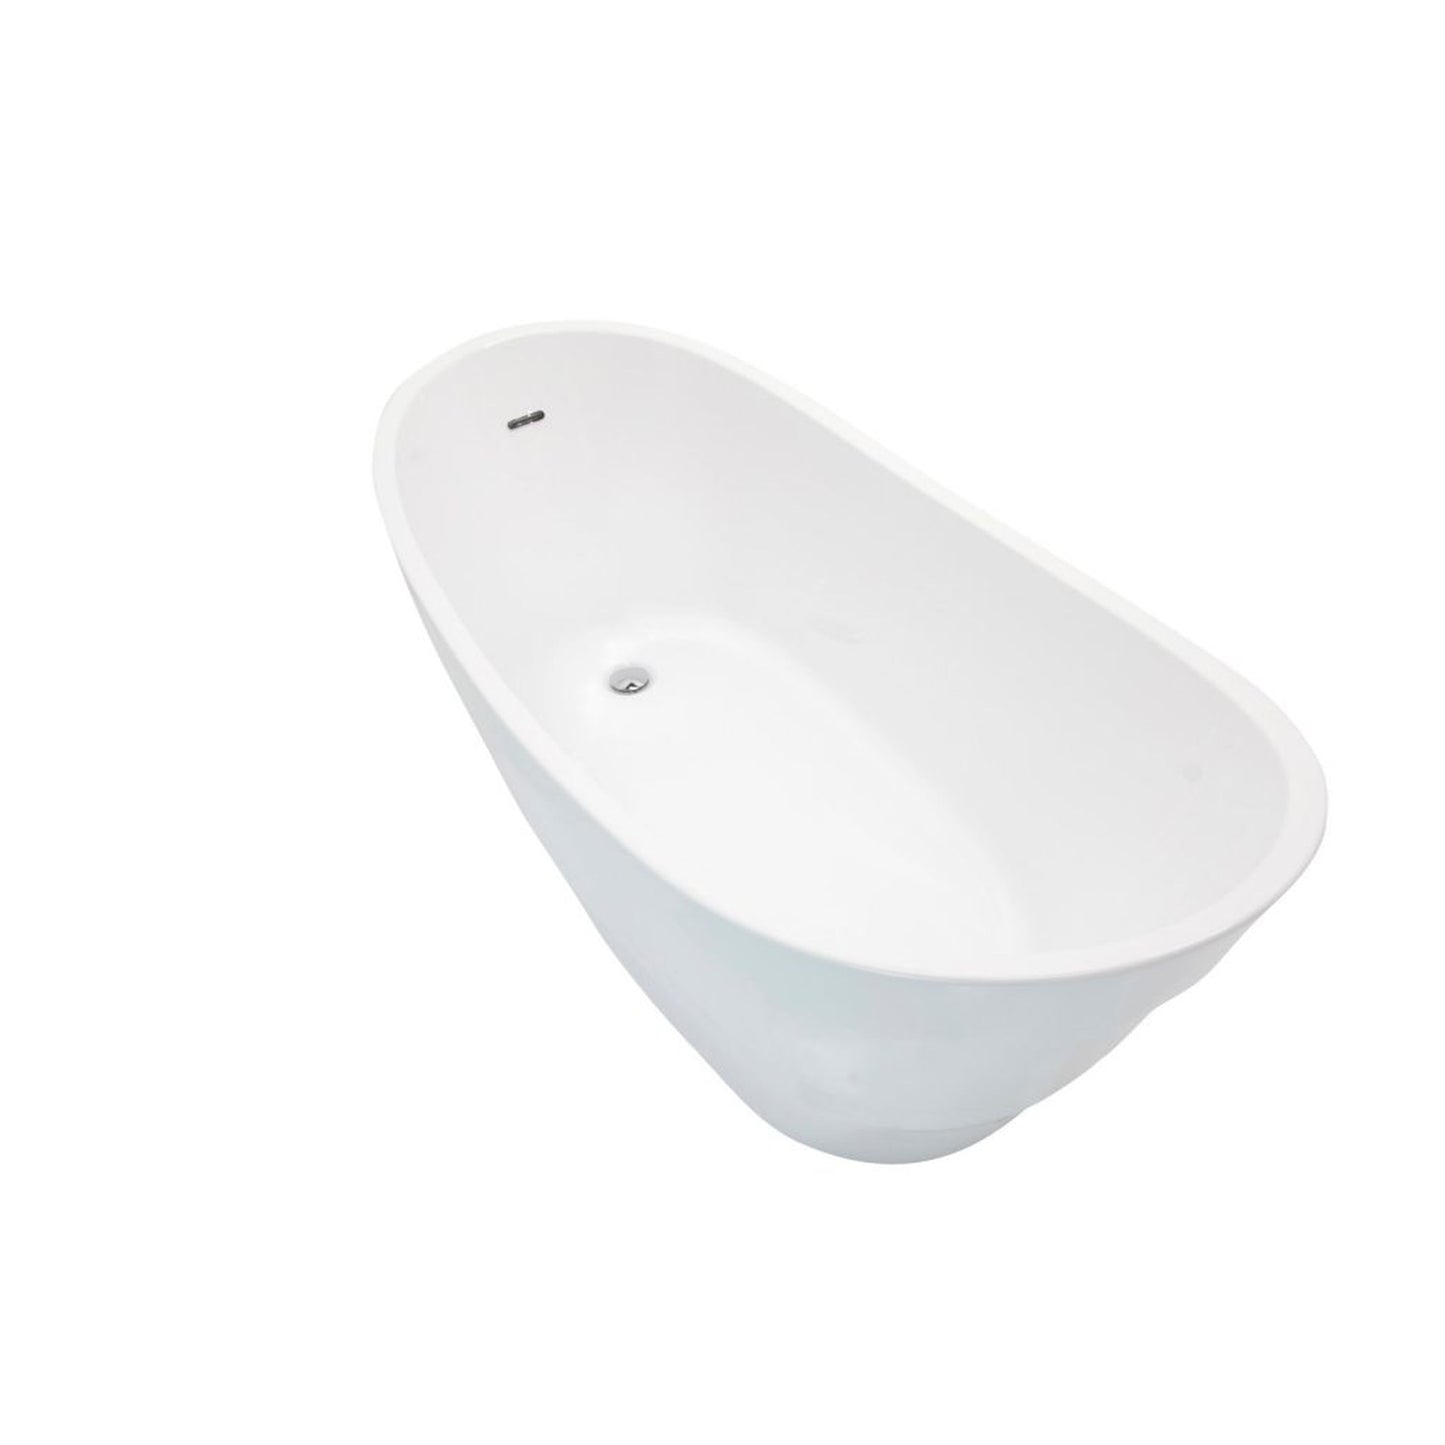 ANZZI Stratus Series 67" x 30" Glossy White Freestanding Bathtub With Built-In Overflow and Reversible Drain